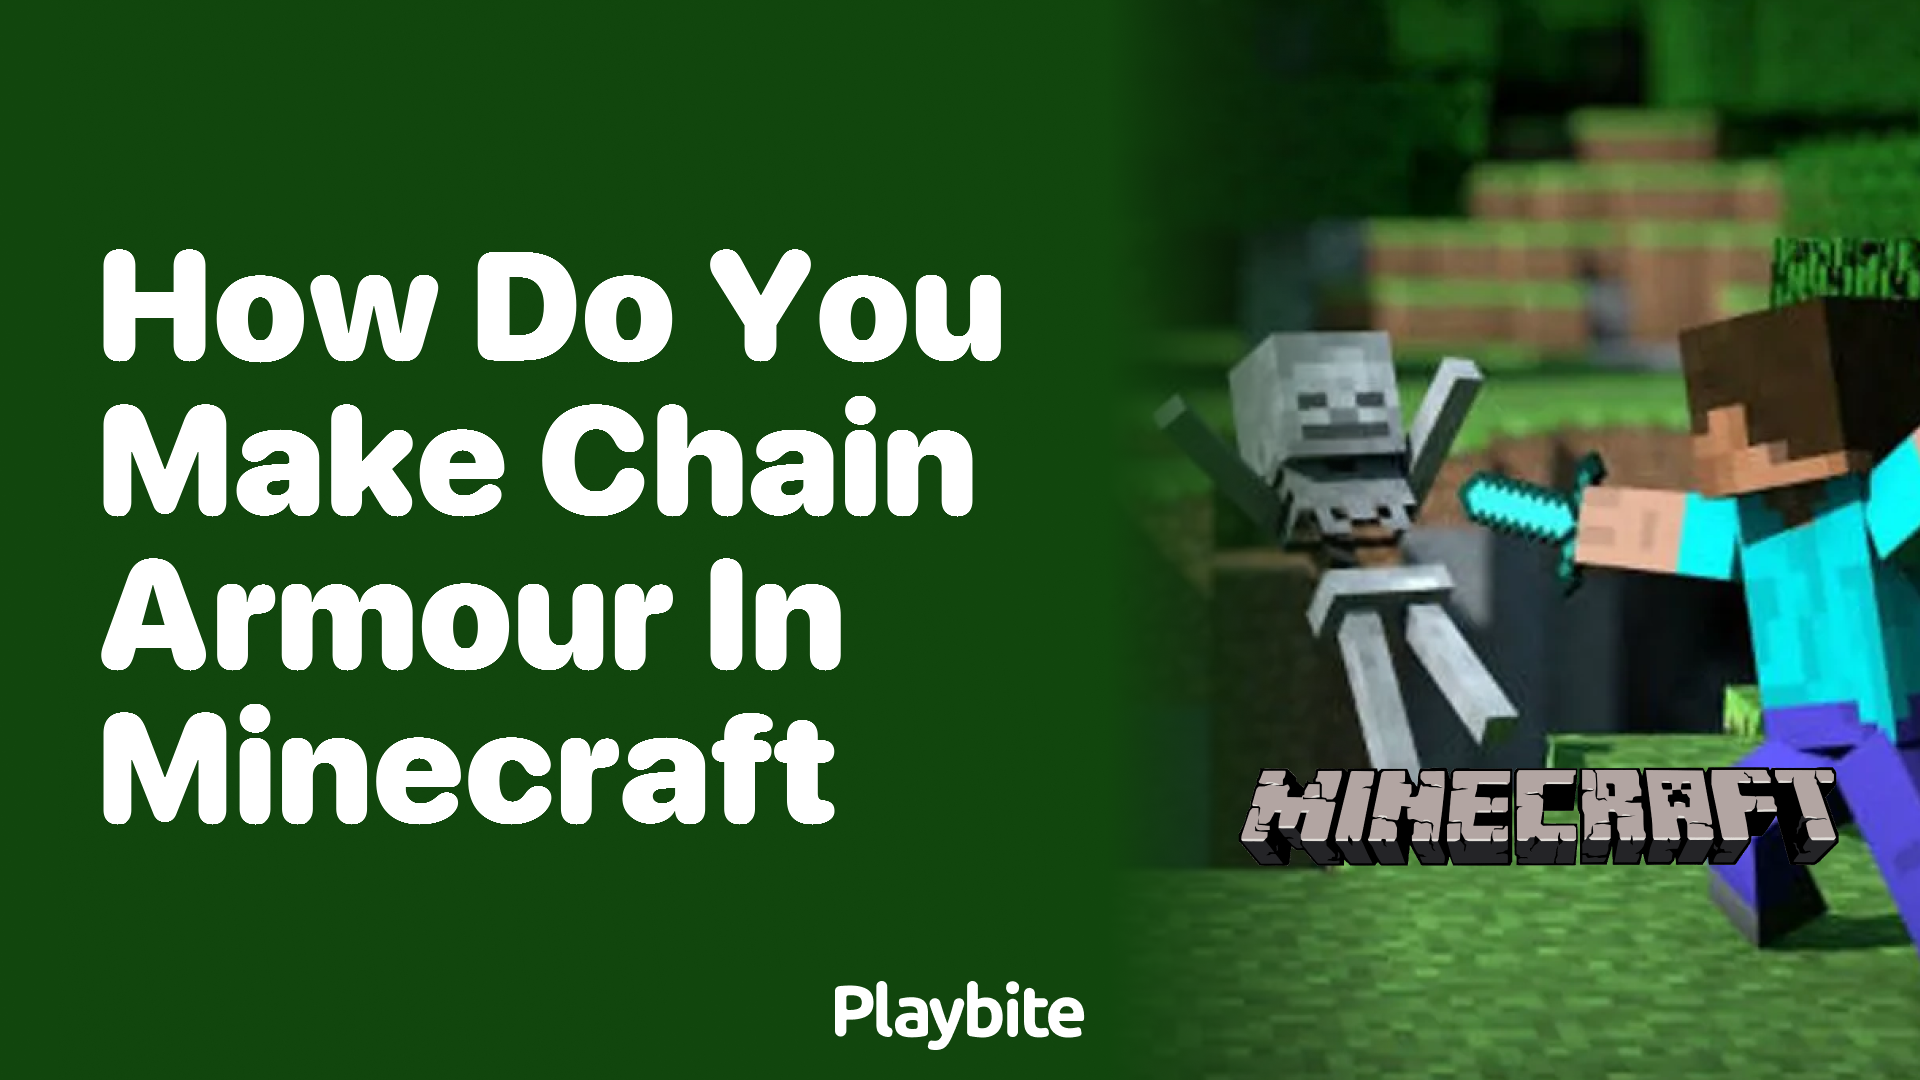 How Do You Make Chain Armor in Minecraft?